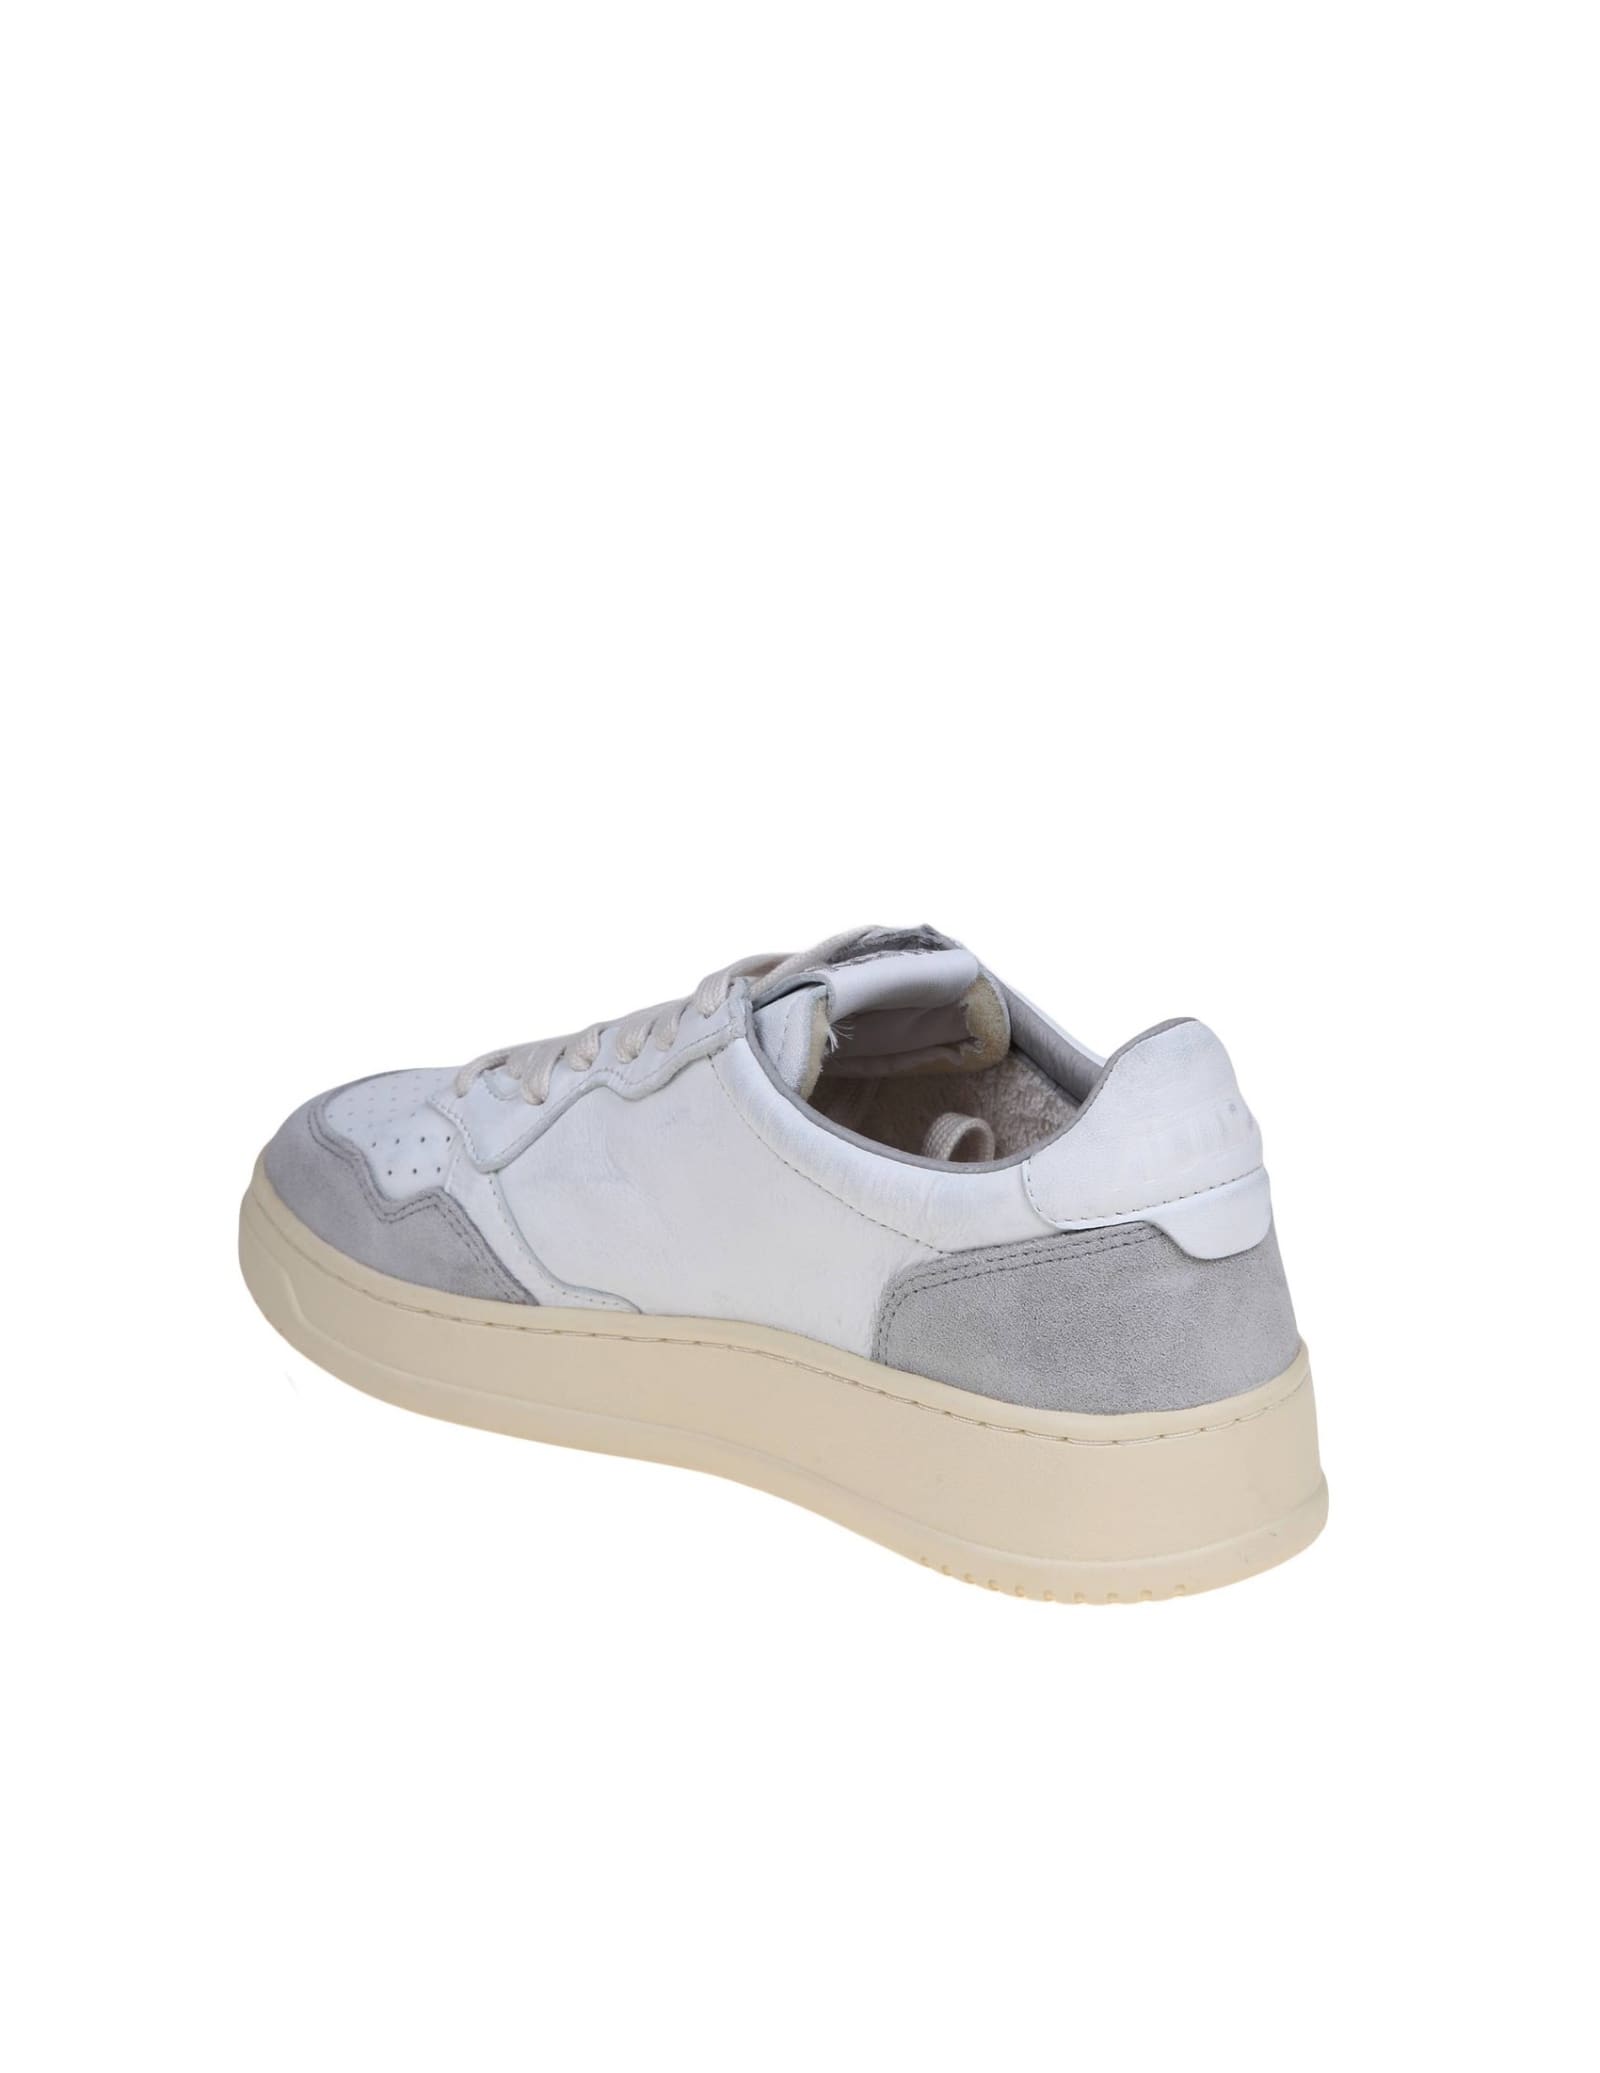 Shop Autry Sneakers In White And Gray Leather And Suede In White Grey